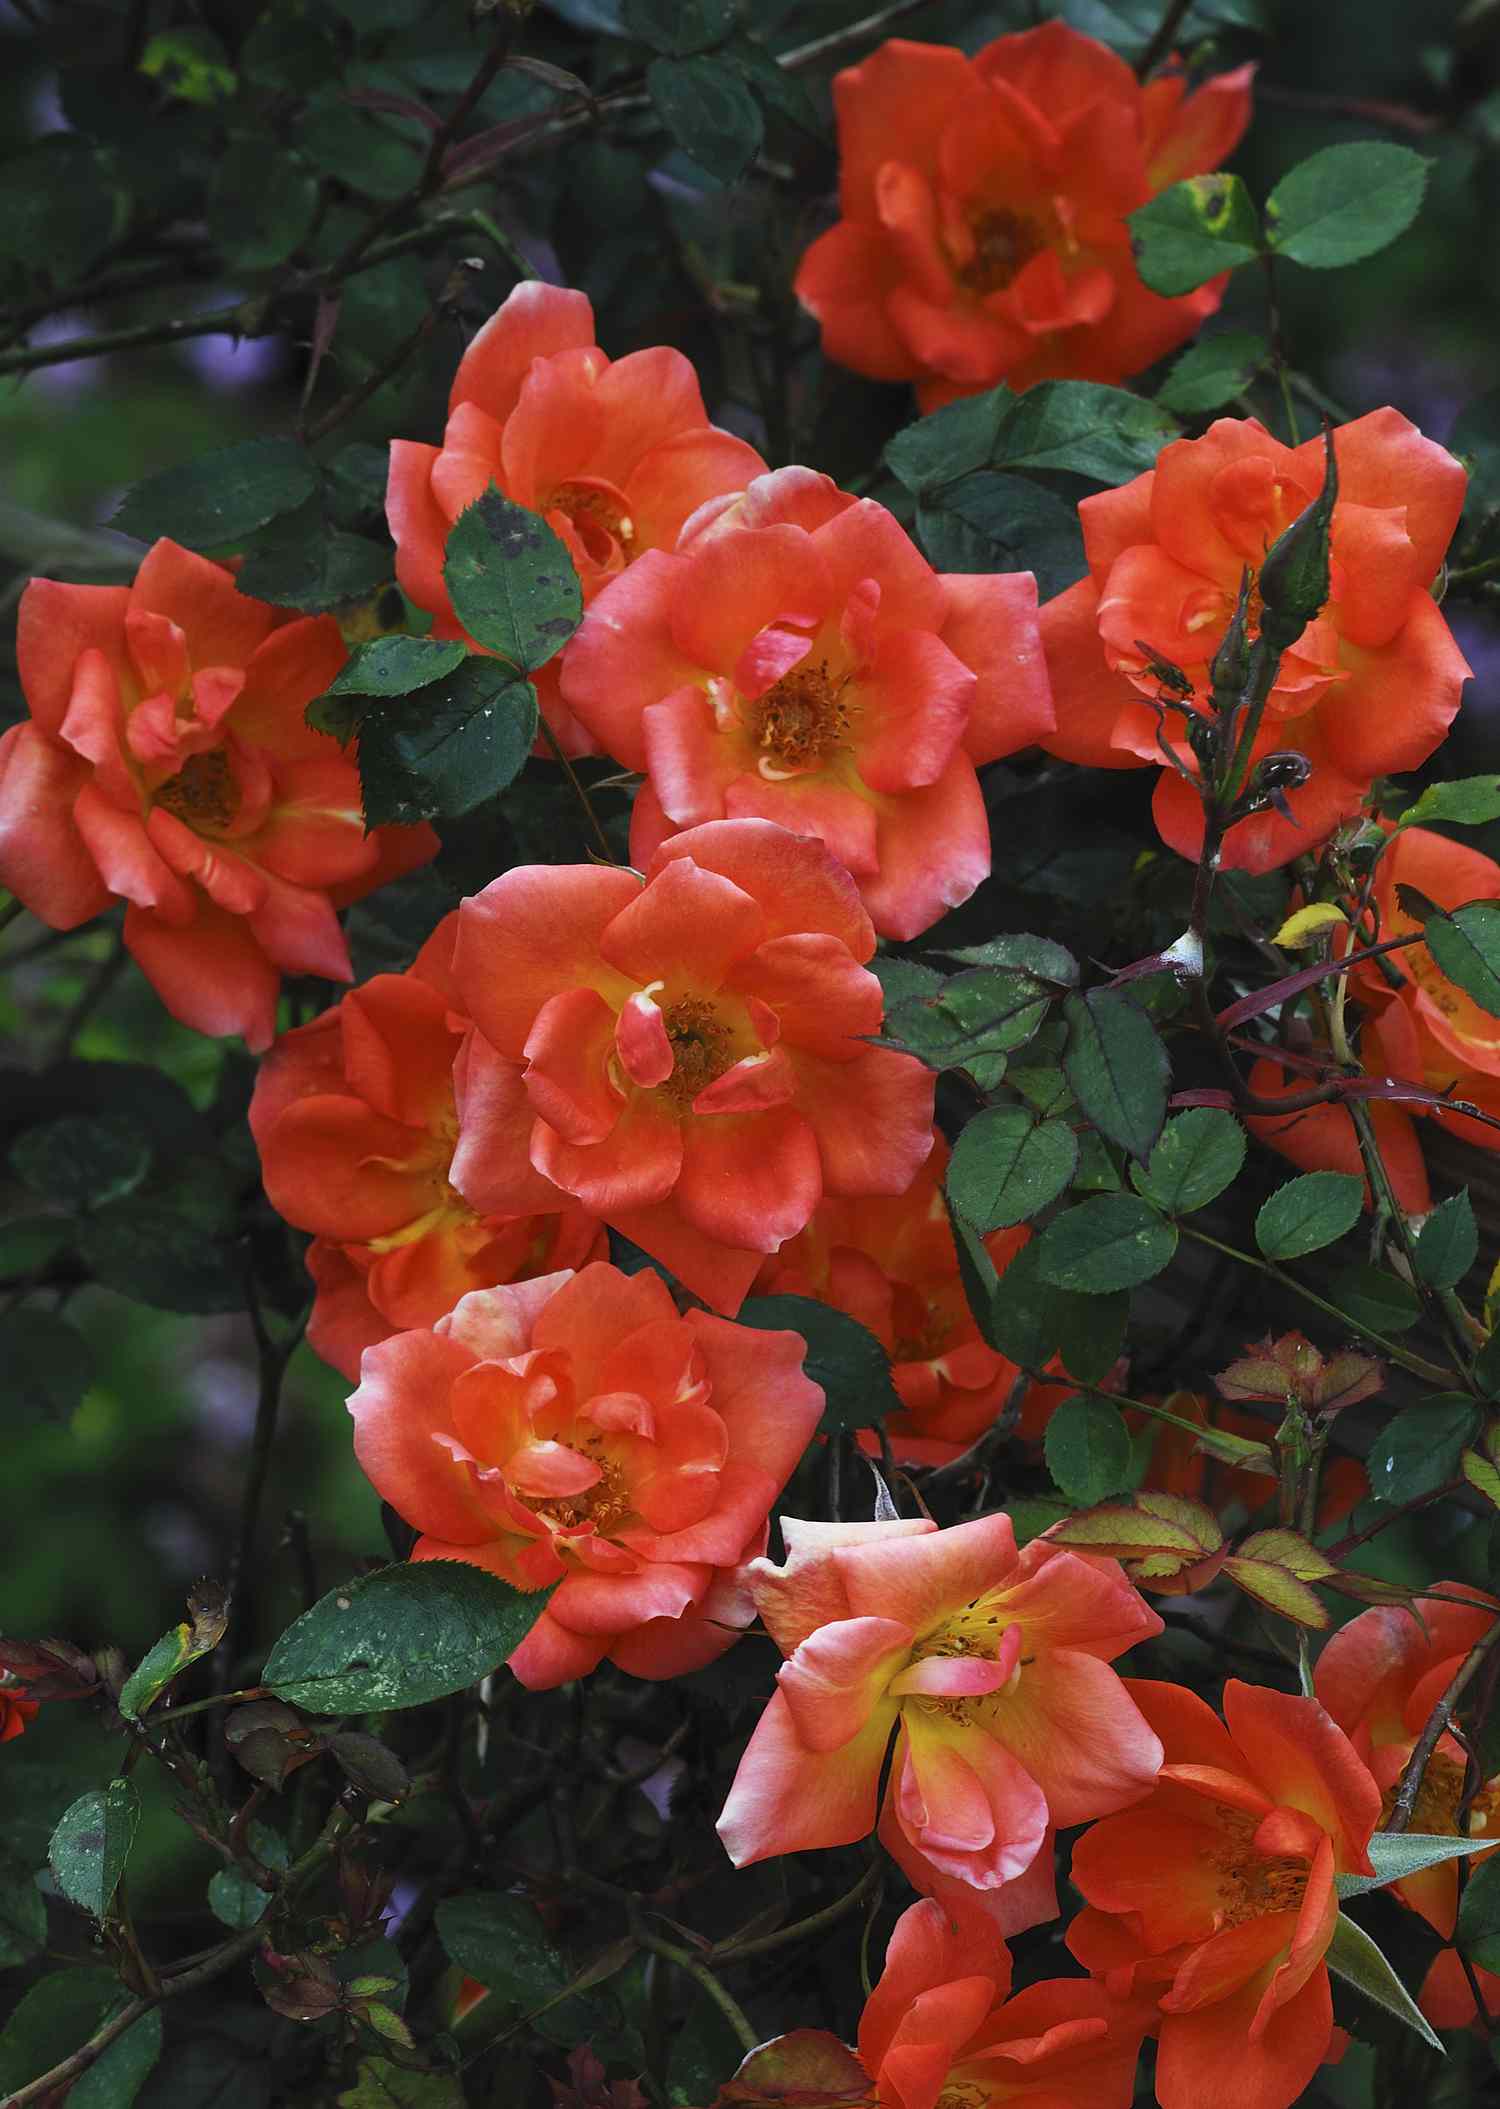 Warm Welcome rose with orange-red blooms